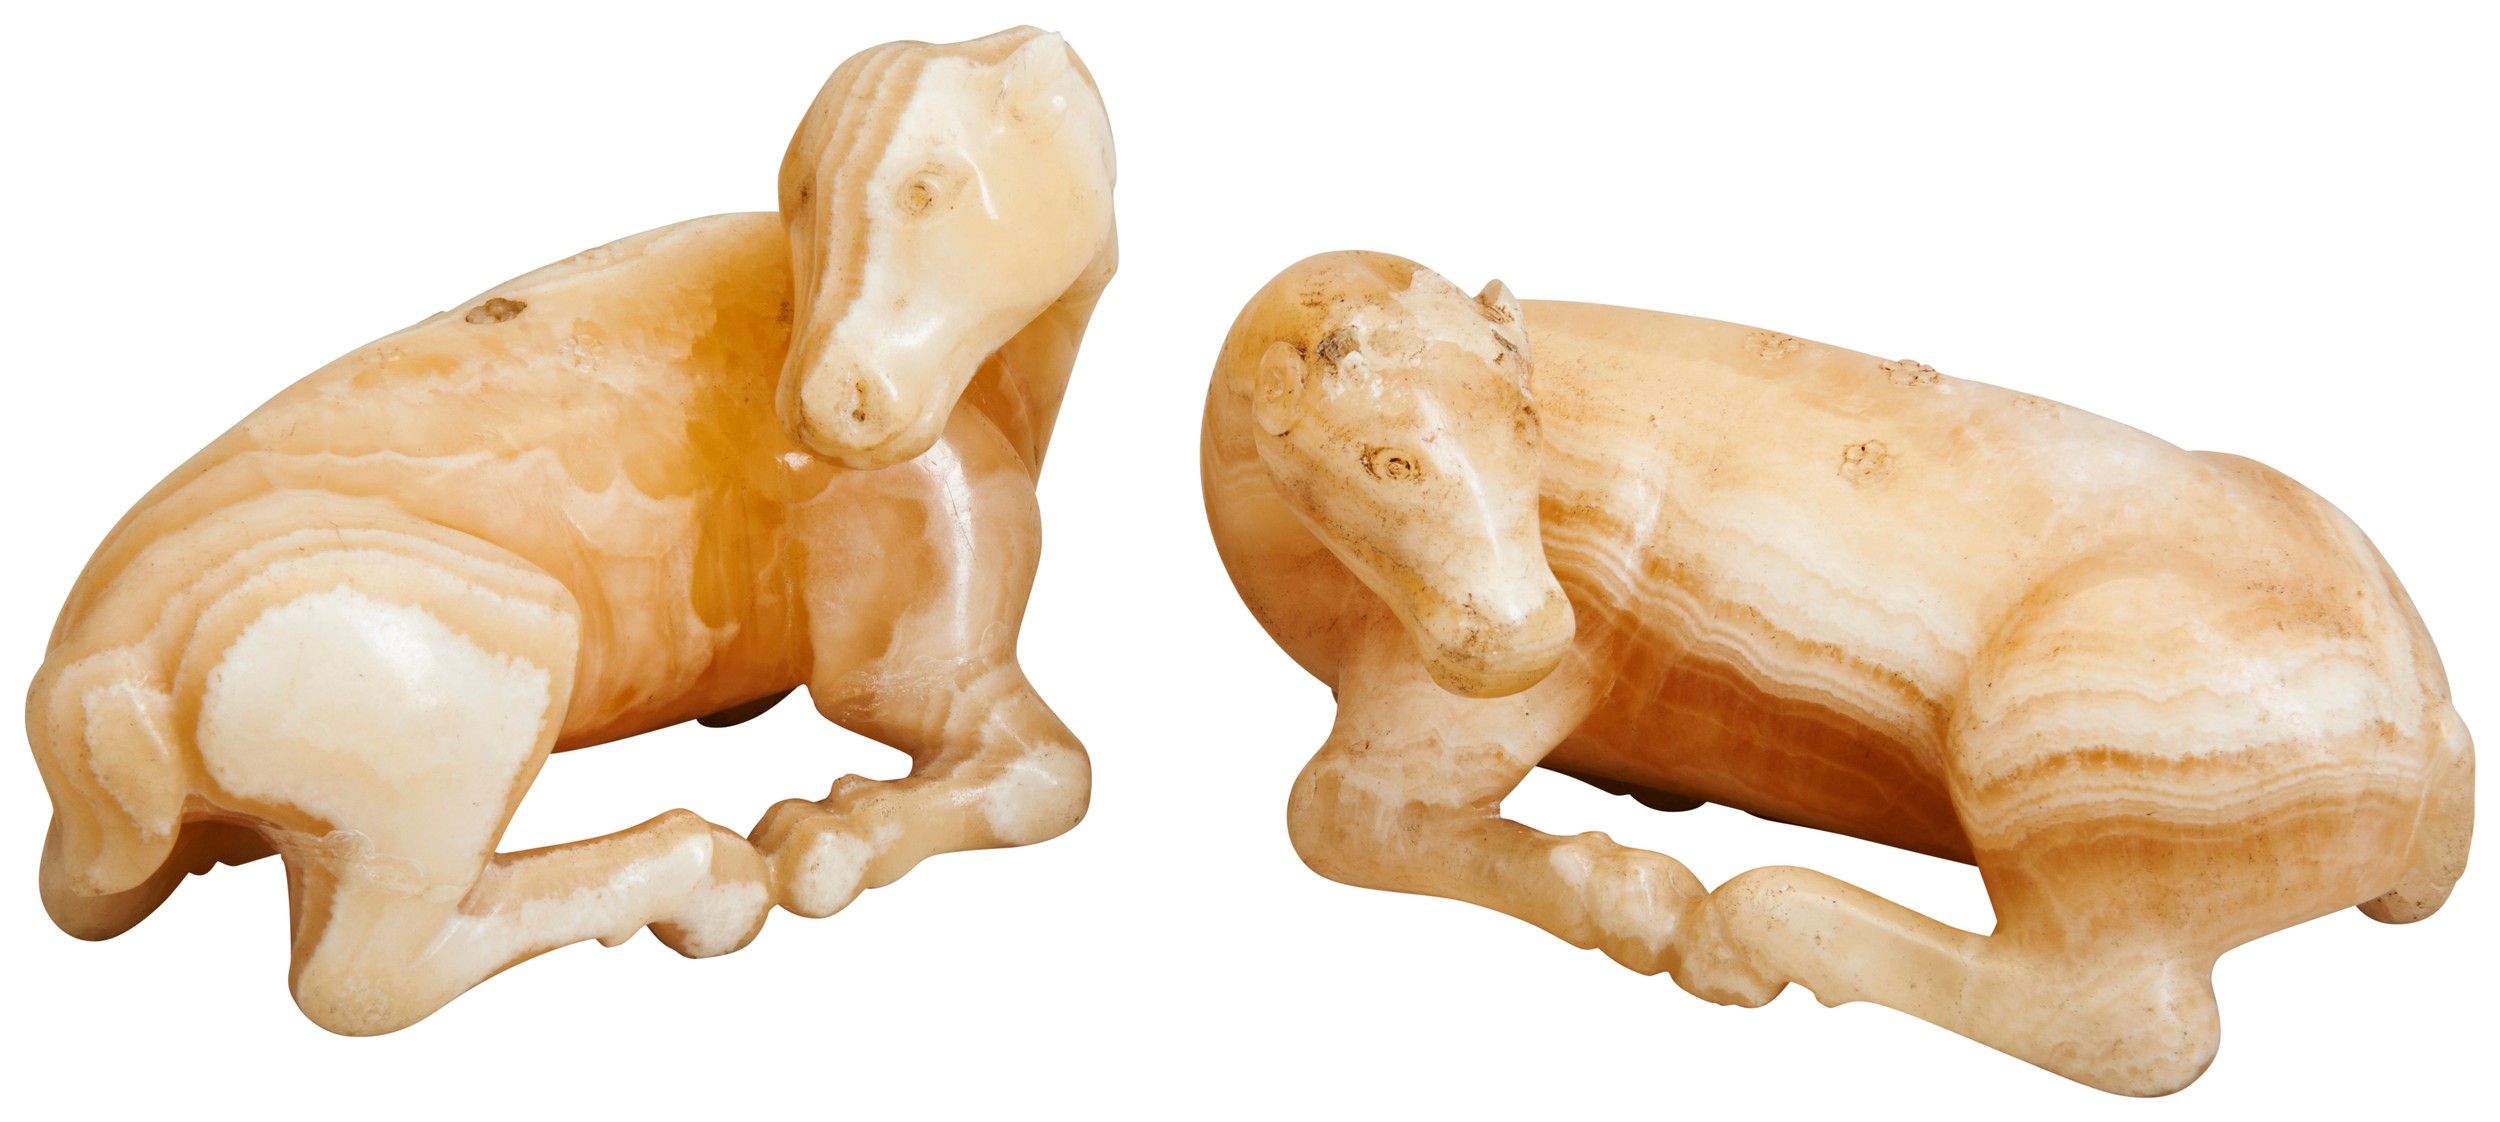 A RARE PAIR OF SOAPSTONE FIGURES OF DEER QING DYNASTY, 19TH CENTURY 清 寿山石鹿型摆件一对 the deer modelled